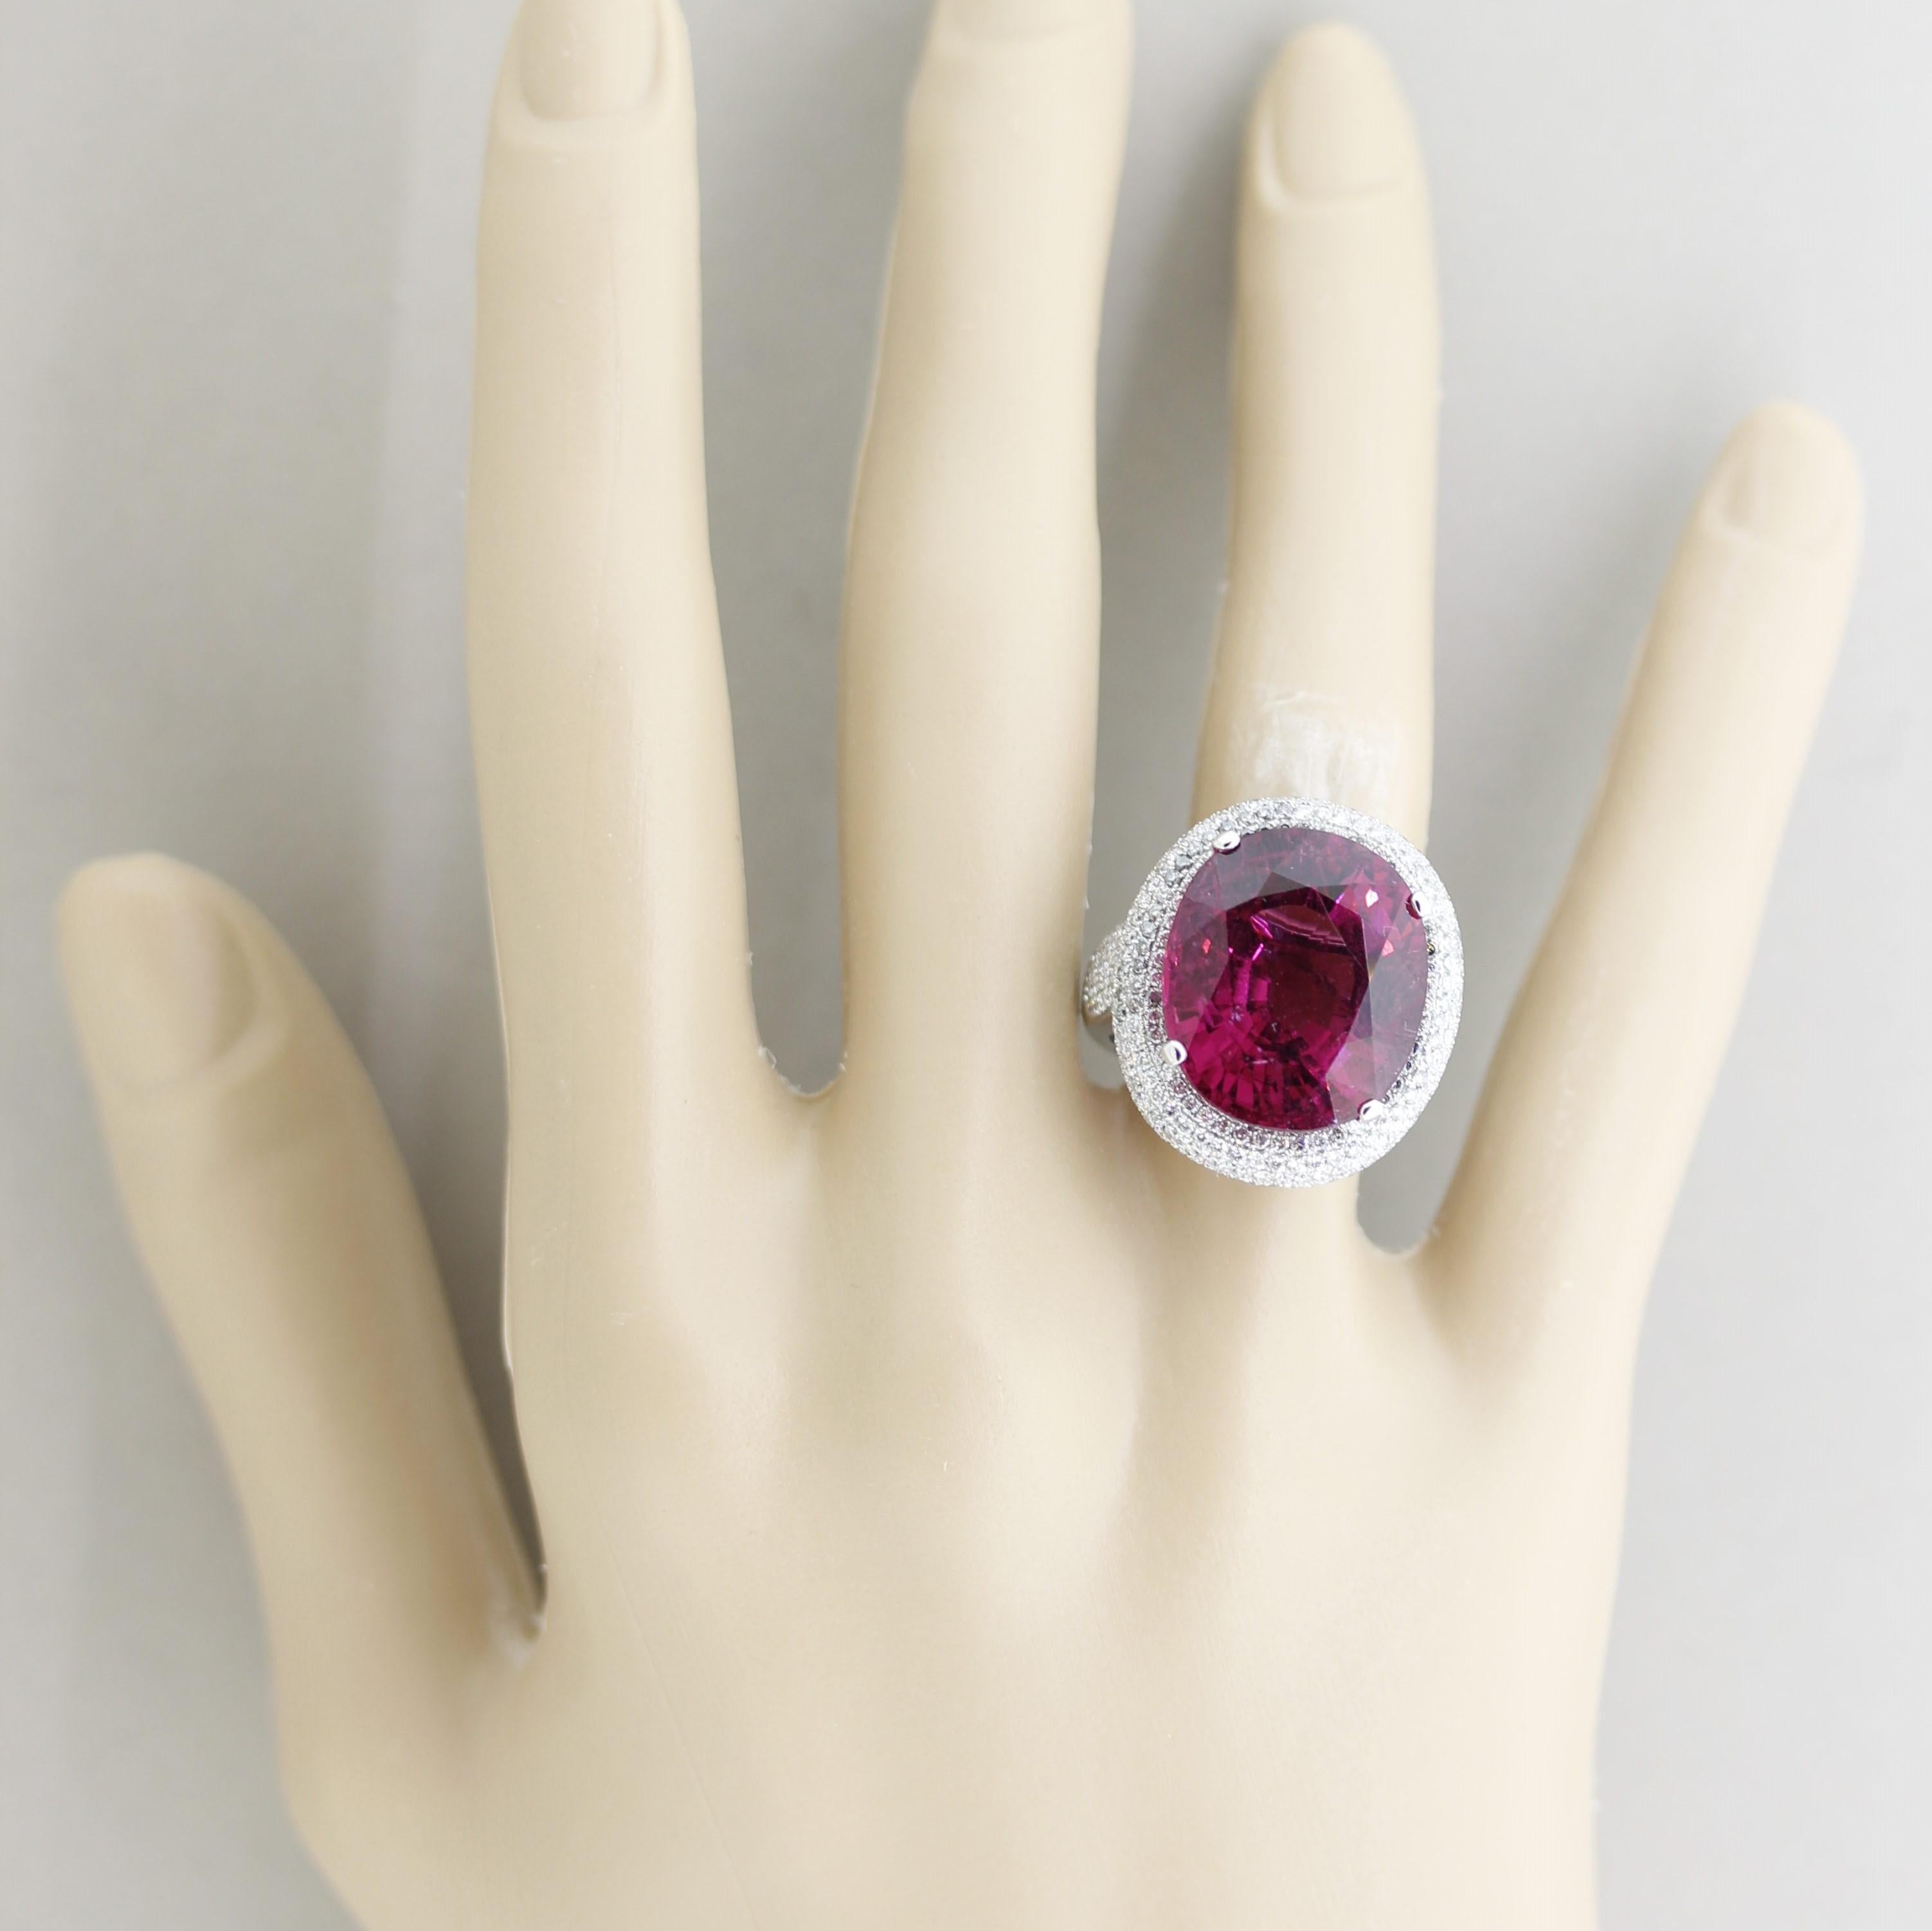 Magnificent Rubellite Tourmaline Diamond Gold Cocktail Ring For Sale 5